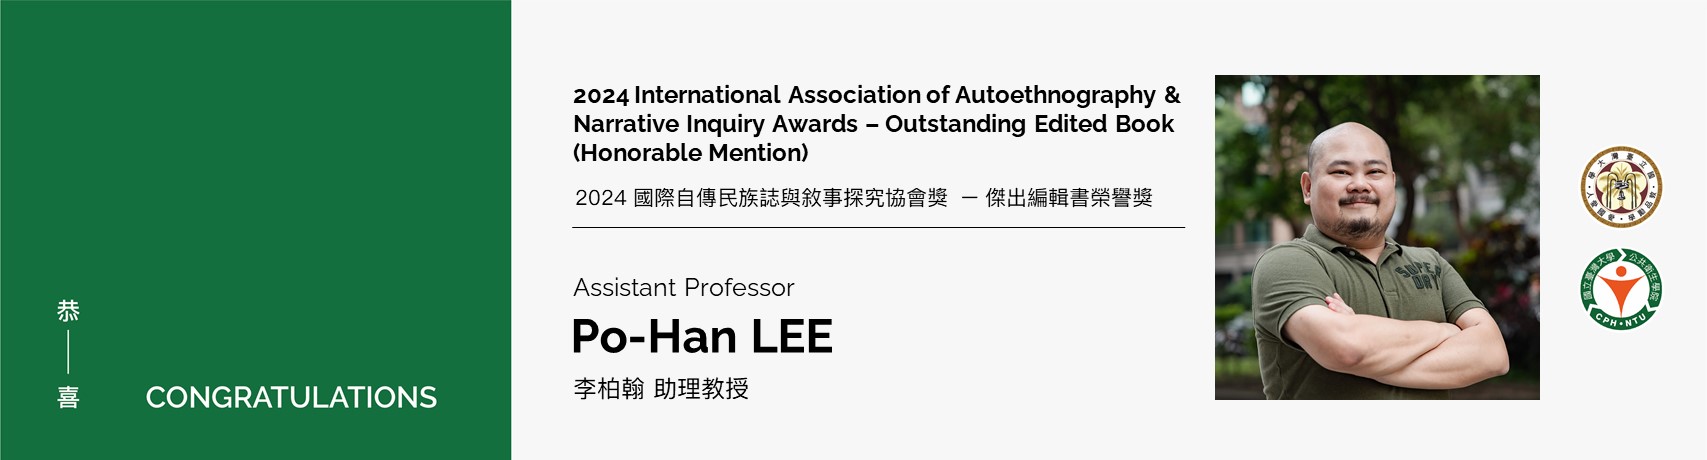 Congratulations to Assistant Prof. Po-Han LEE on receiving the 2024 International Association of Autoethnography & Narra